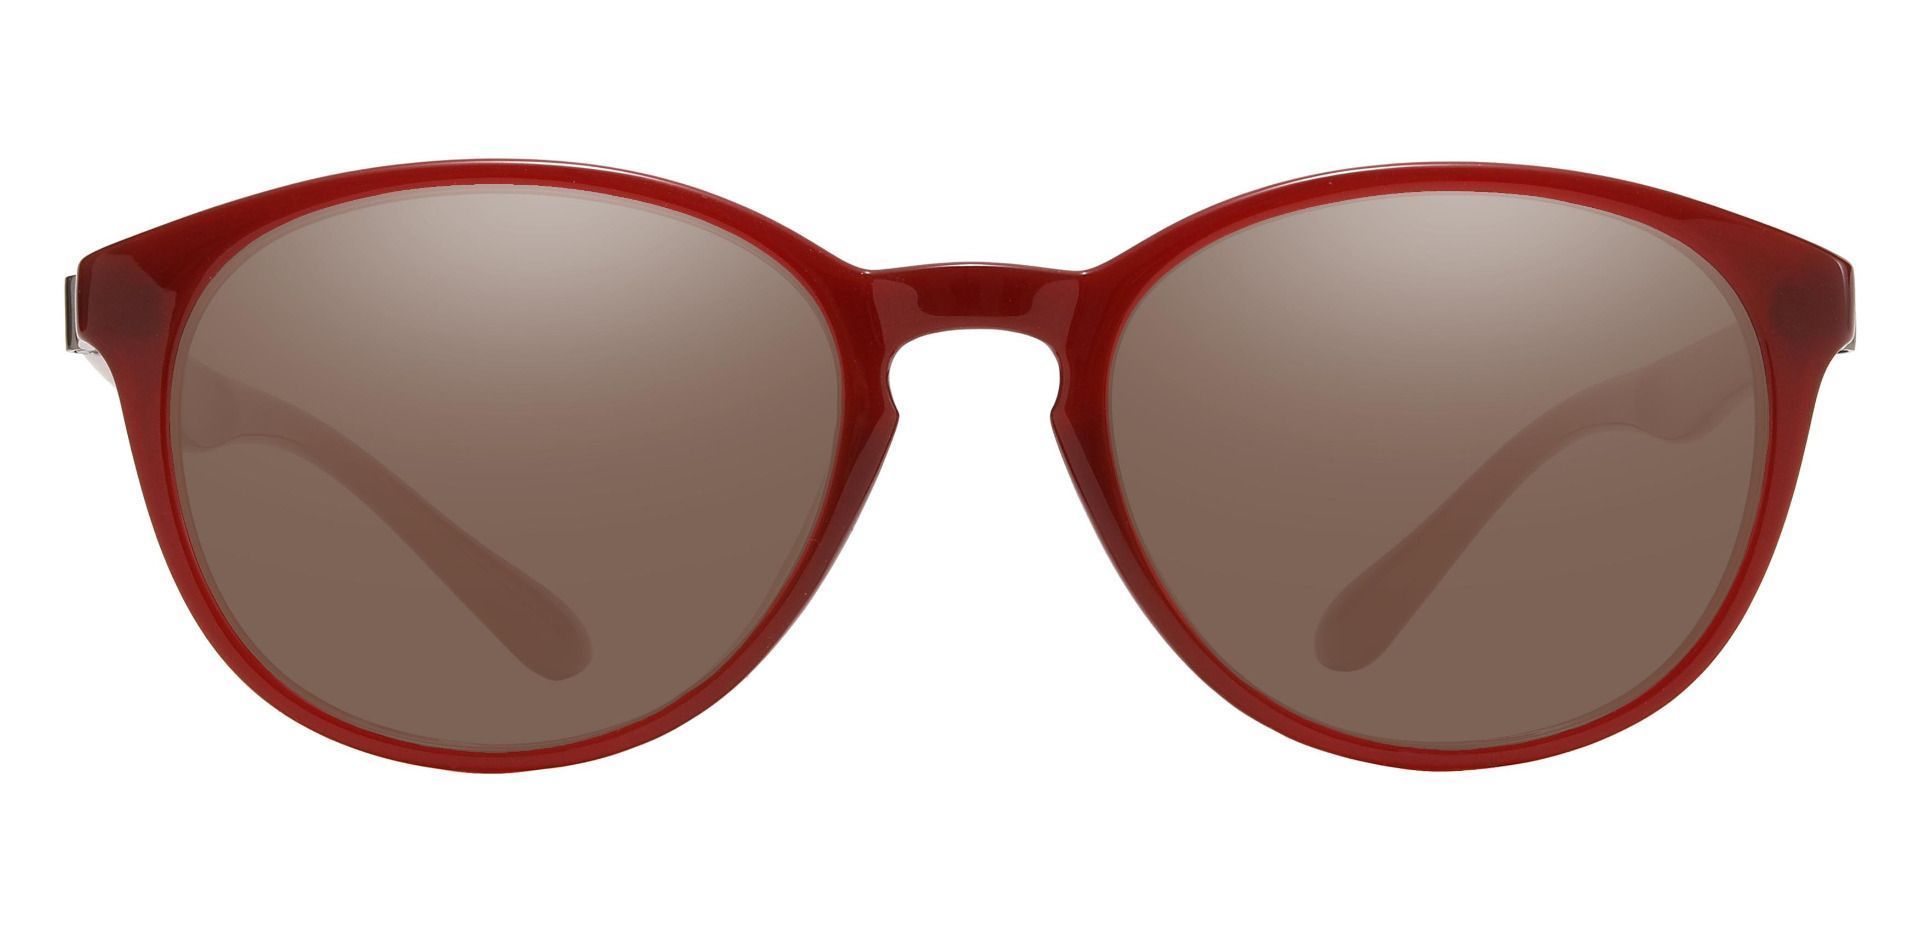 Celia Oval Non-Rx Sunglasses - Red Frame With Brown Lenses